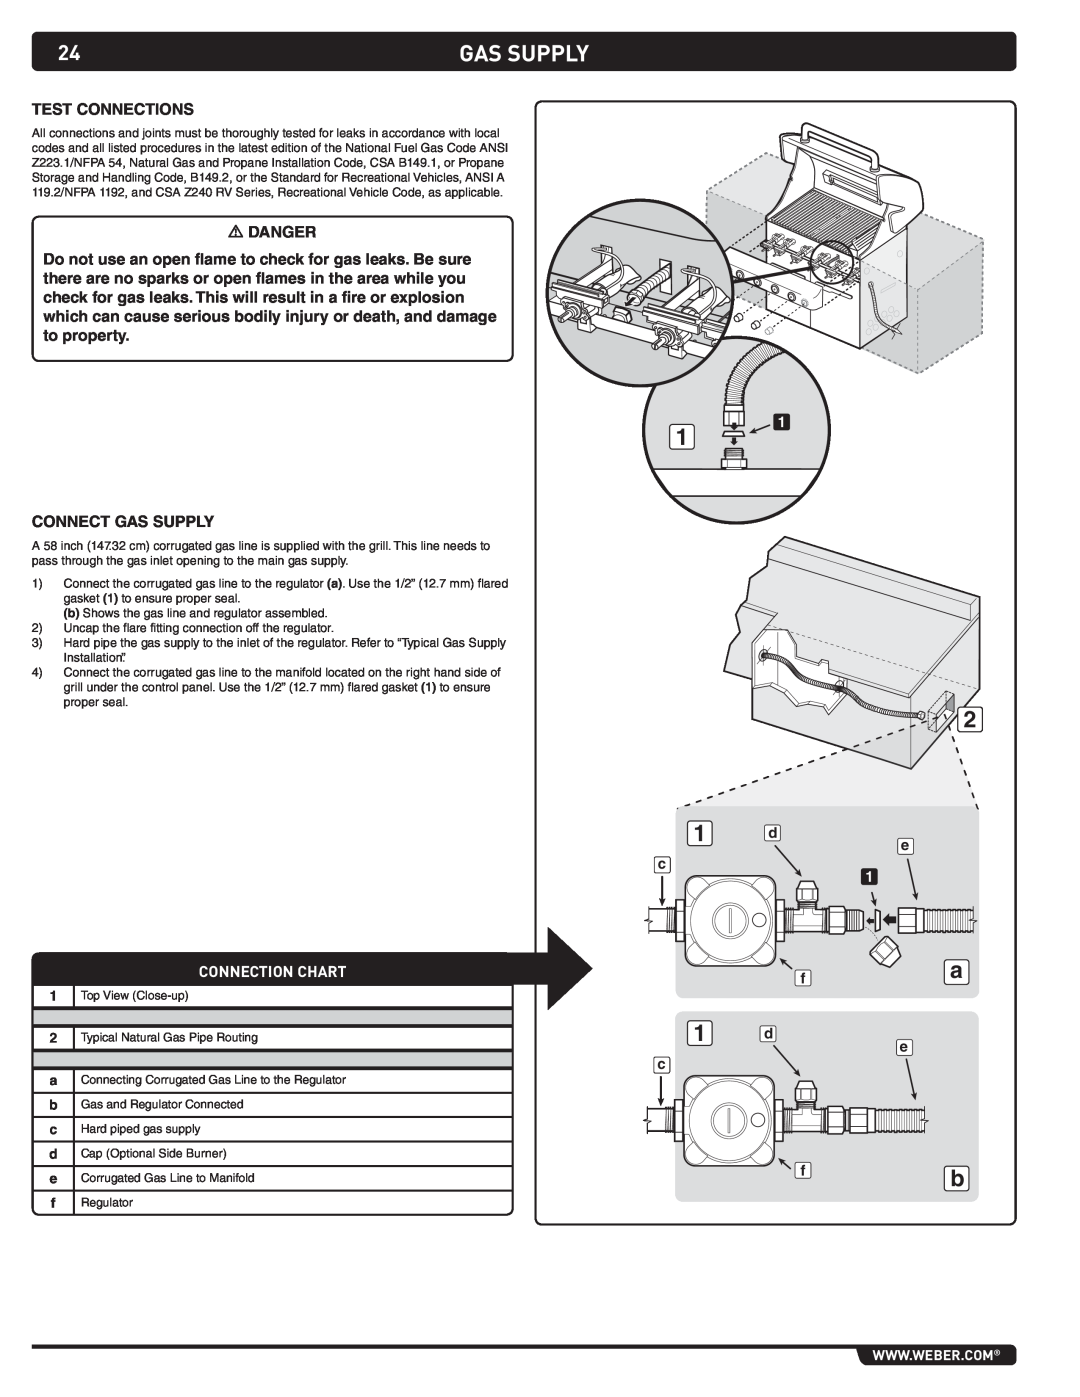 Weber 43270 manual Gas Supply, Connection chart, Typical Natural Gas Pipe Routing, Gas and Regulator Connected 